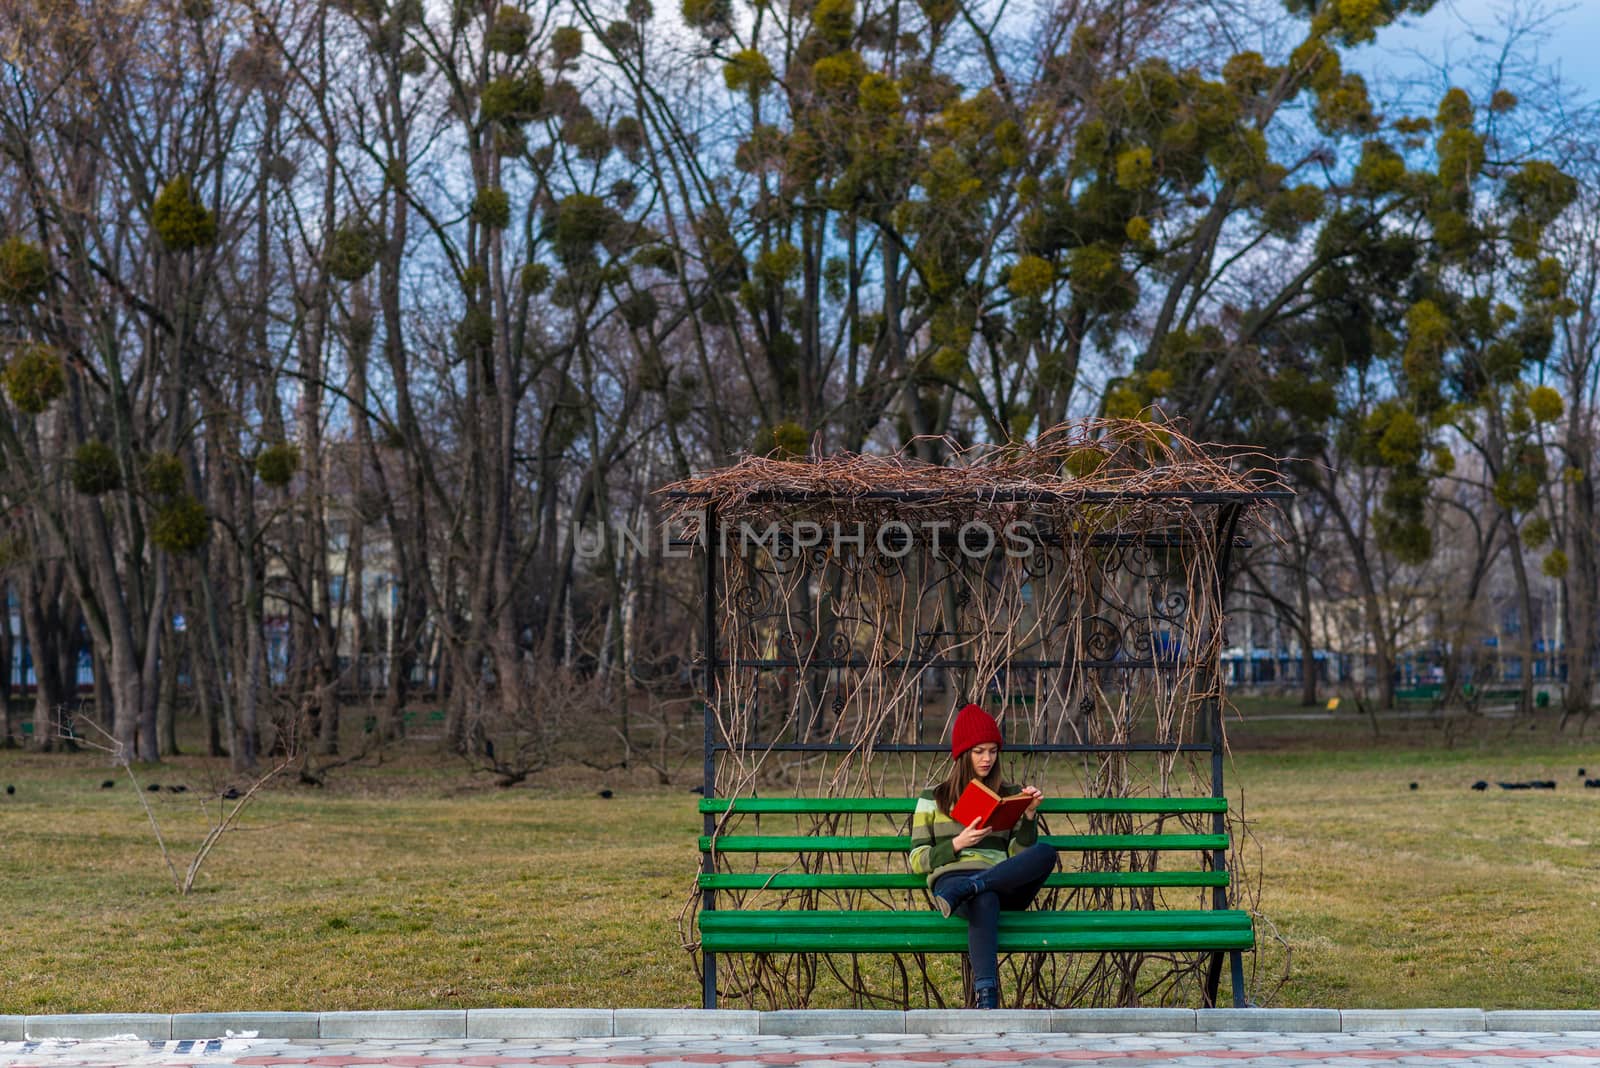 A teenager girl is sitting on a bench in a park in red hat and reading book with red cover.